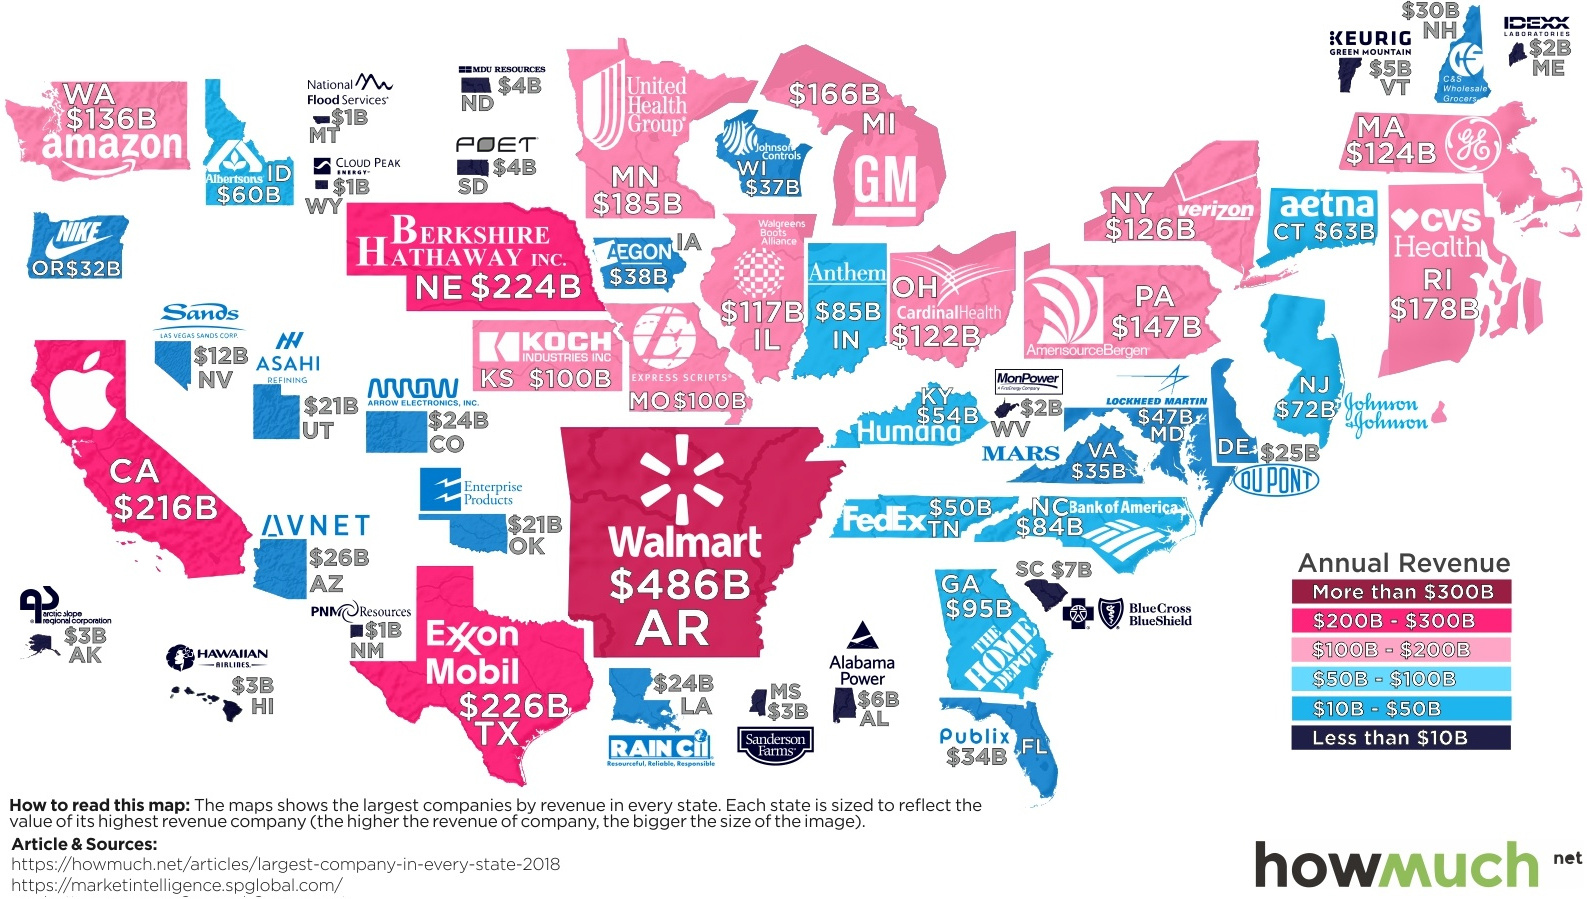 The Largest Company in Every State by Revenue